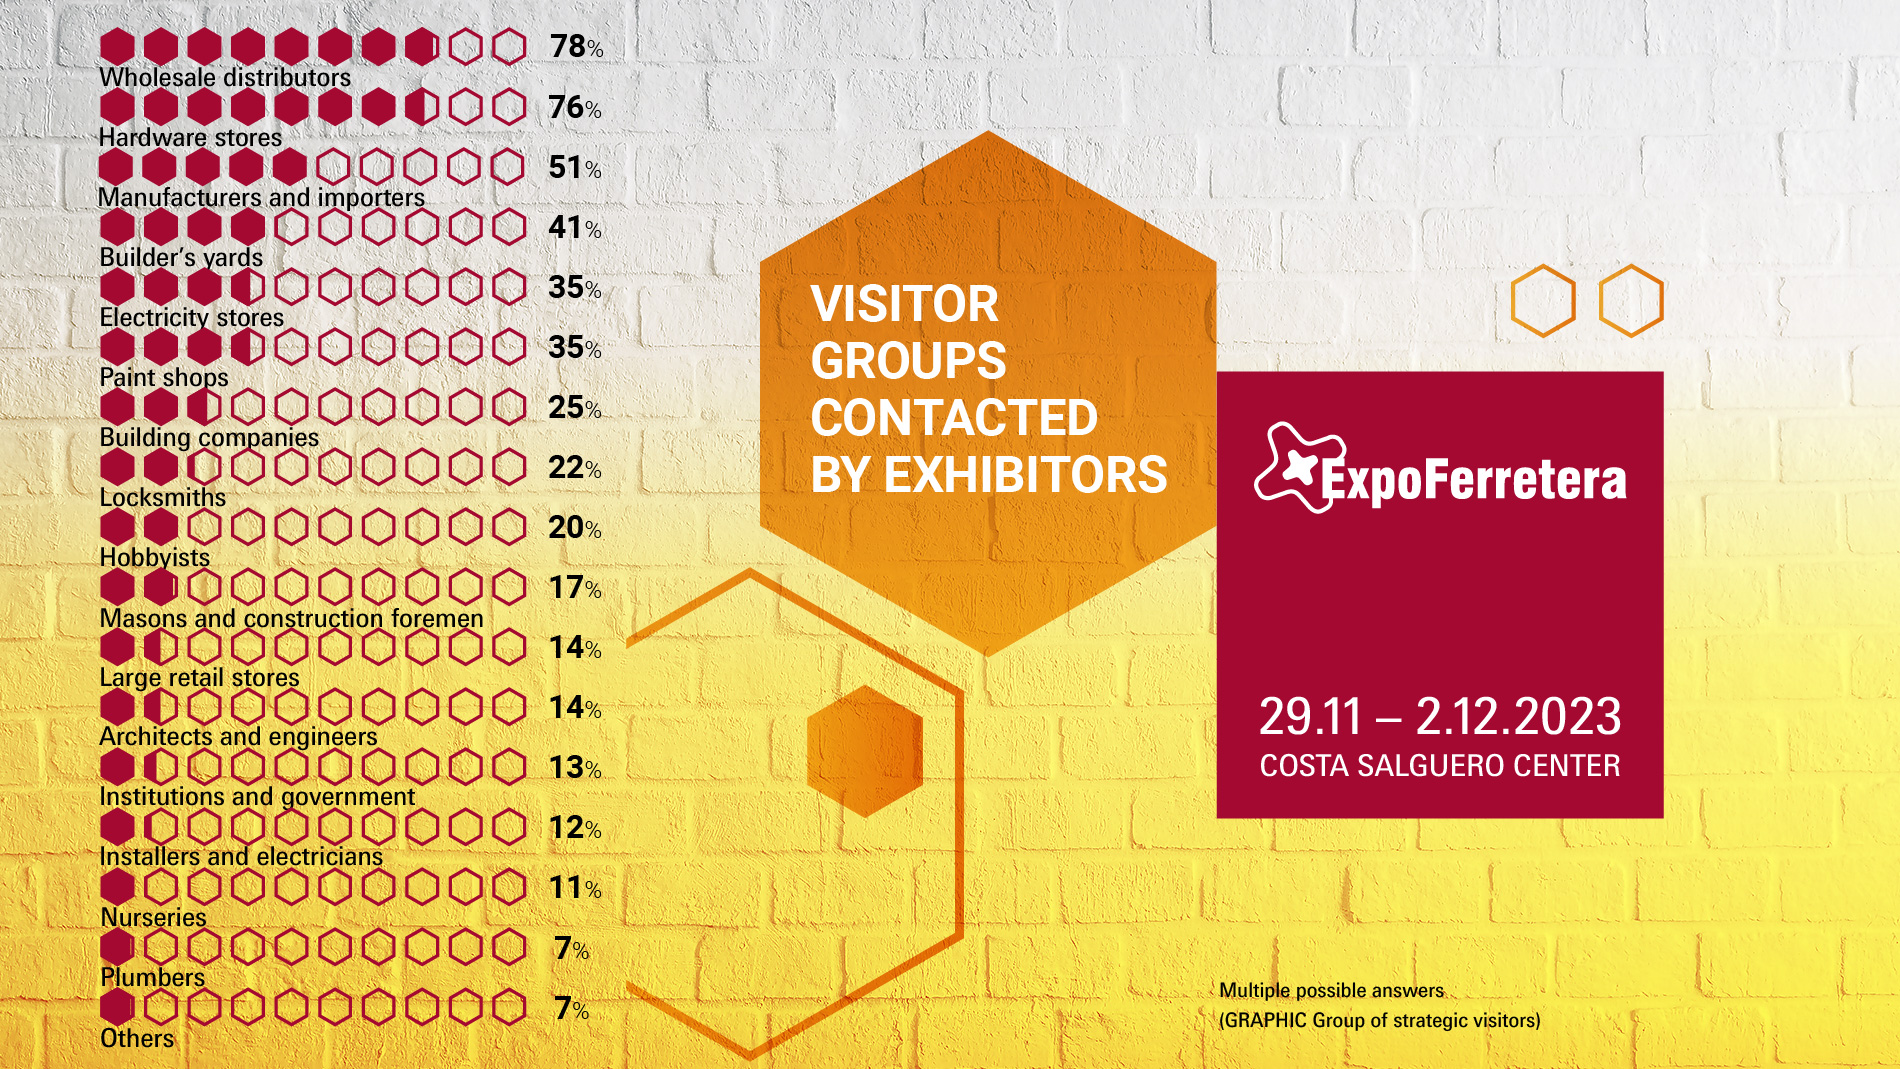 ExpoFerretera: Exhibitors - Group of visitors contacted by exhibitors